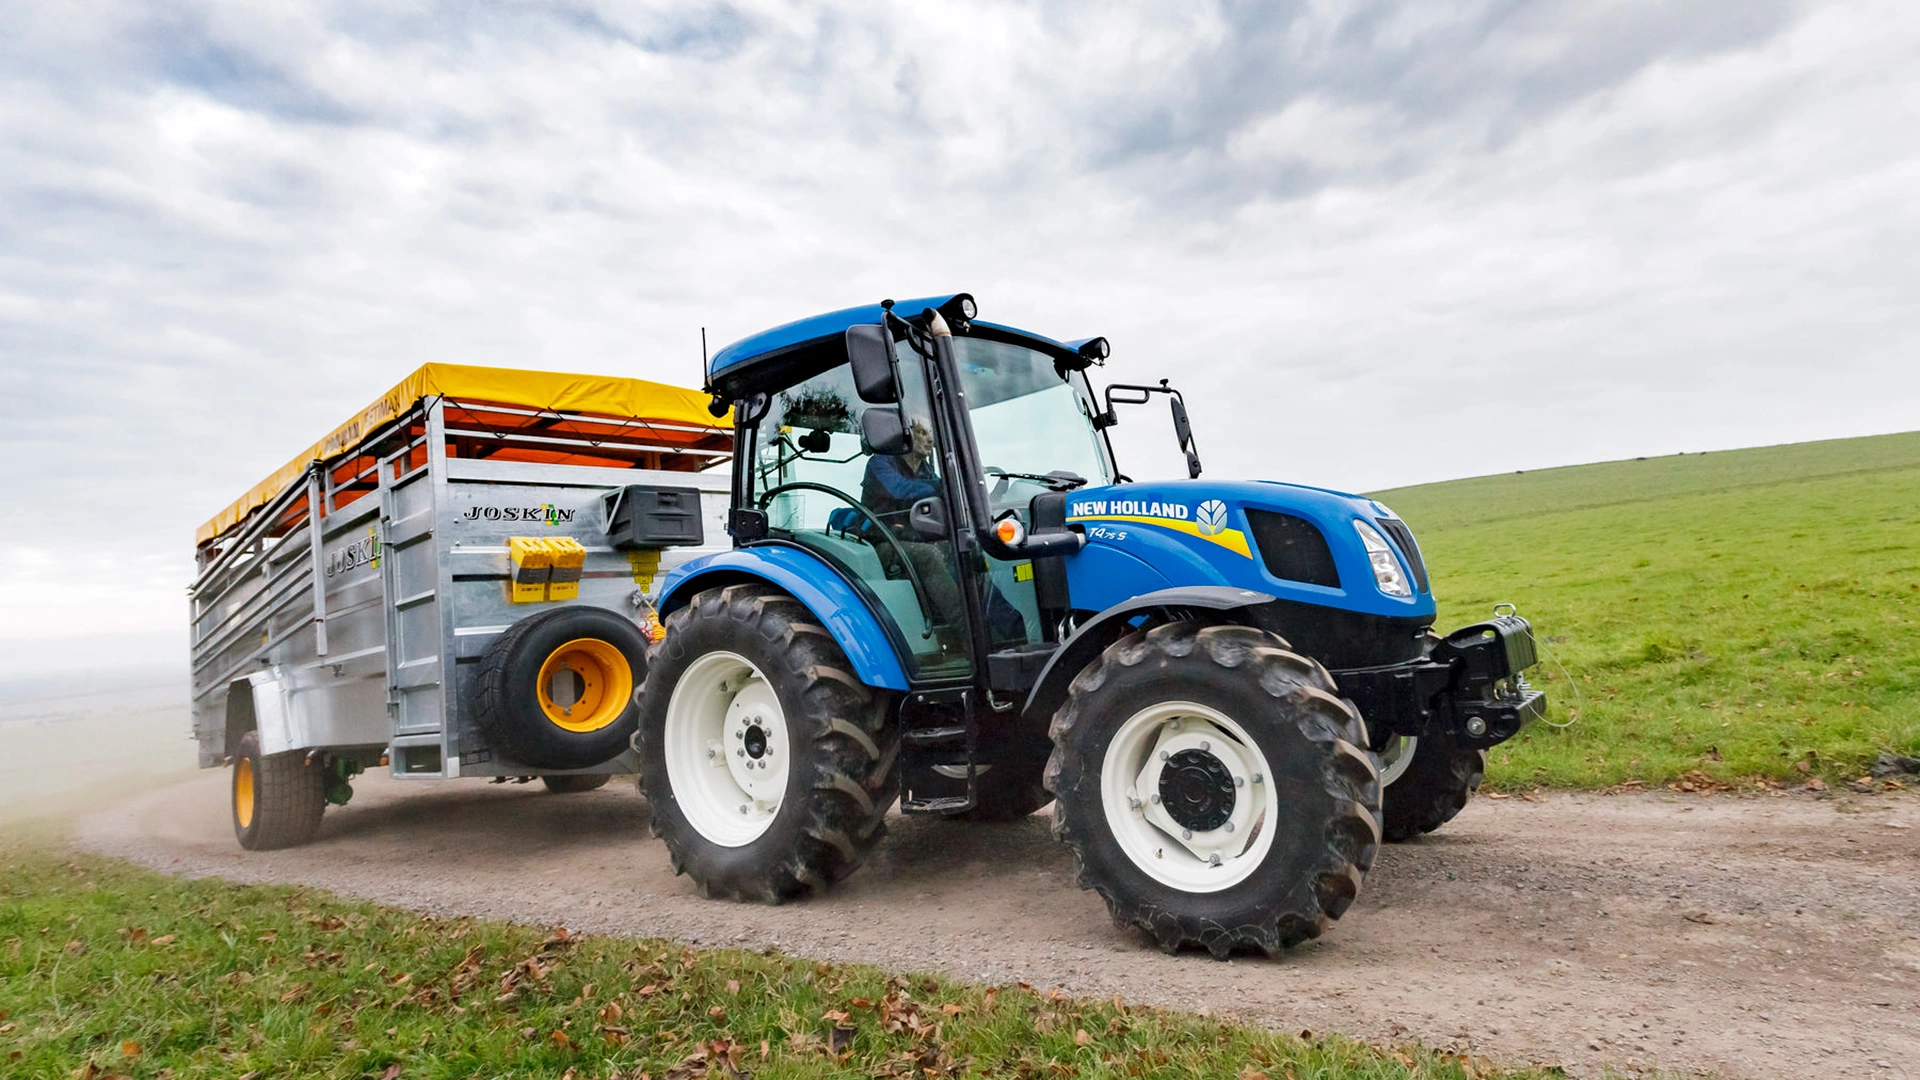 Farming tractor New Holland T4S in action on an agricultural field